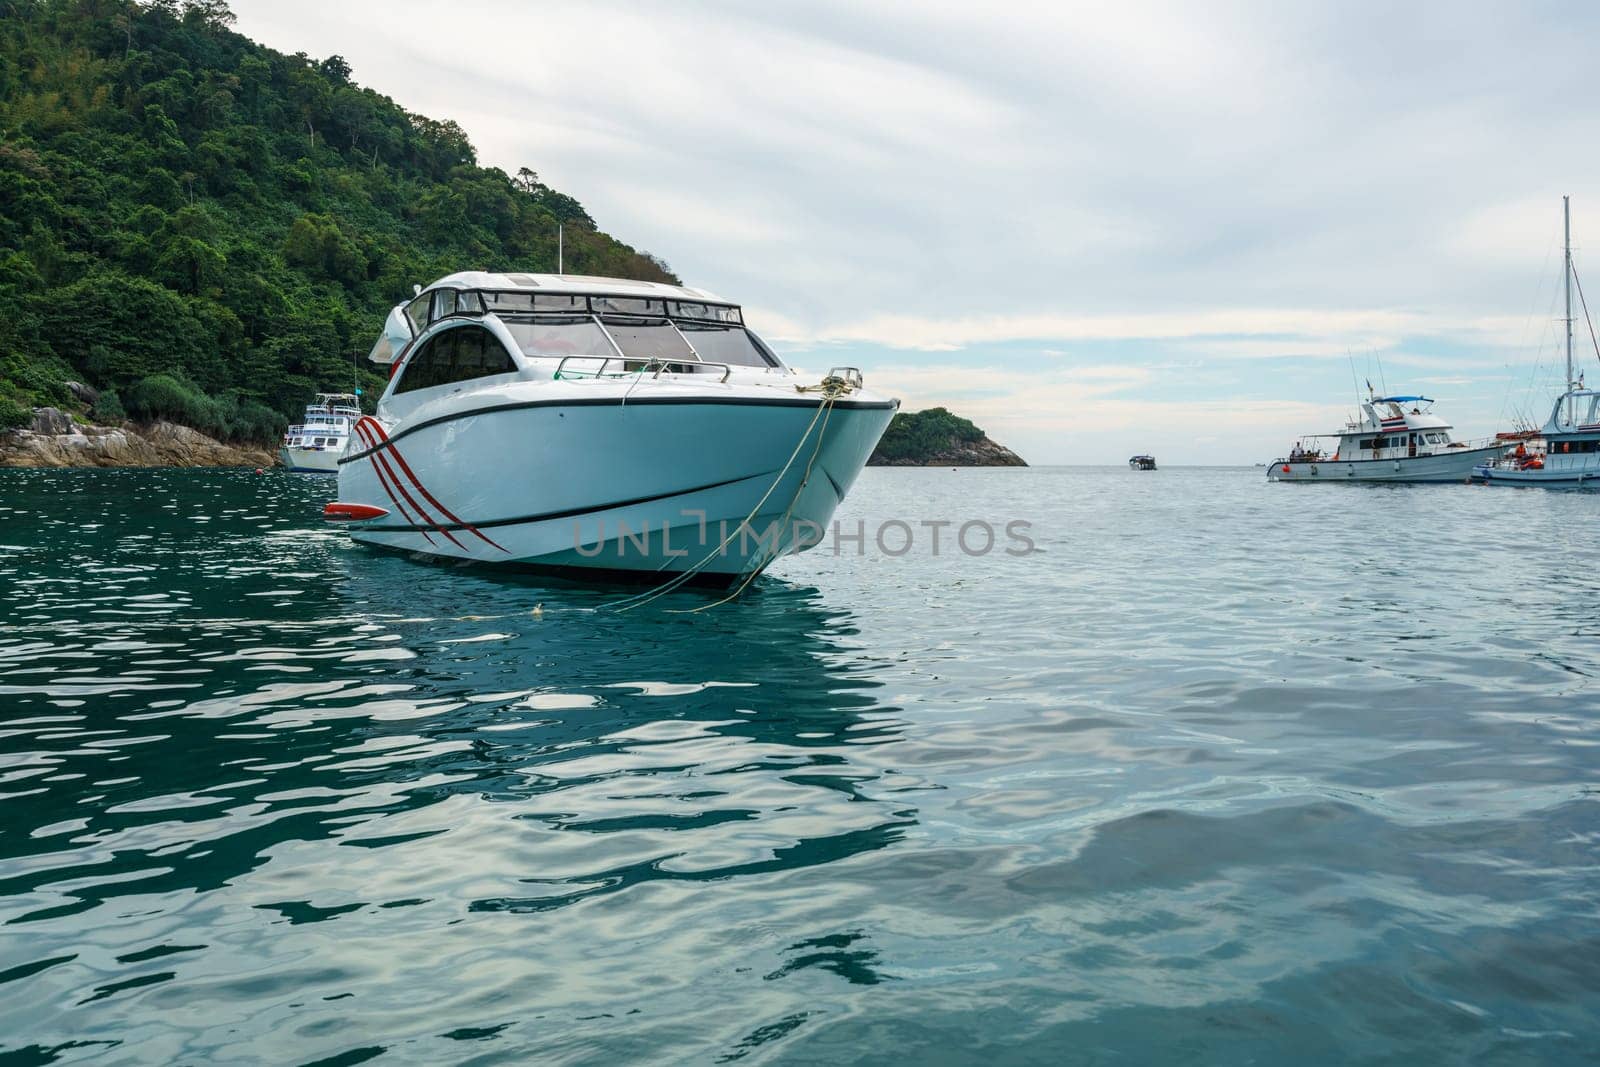 View of boats in bay. Phuket, Thailand by rivertime